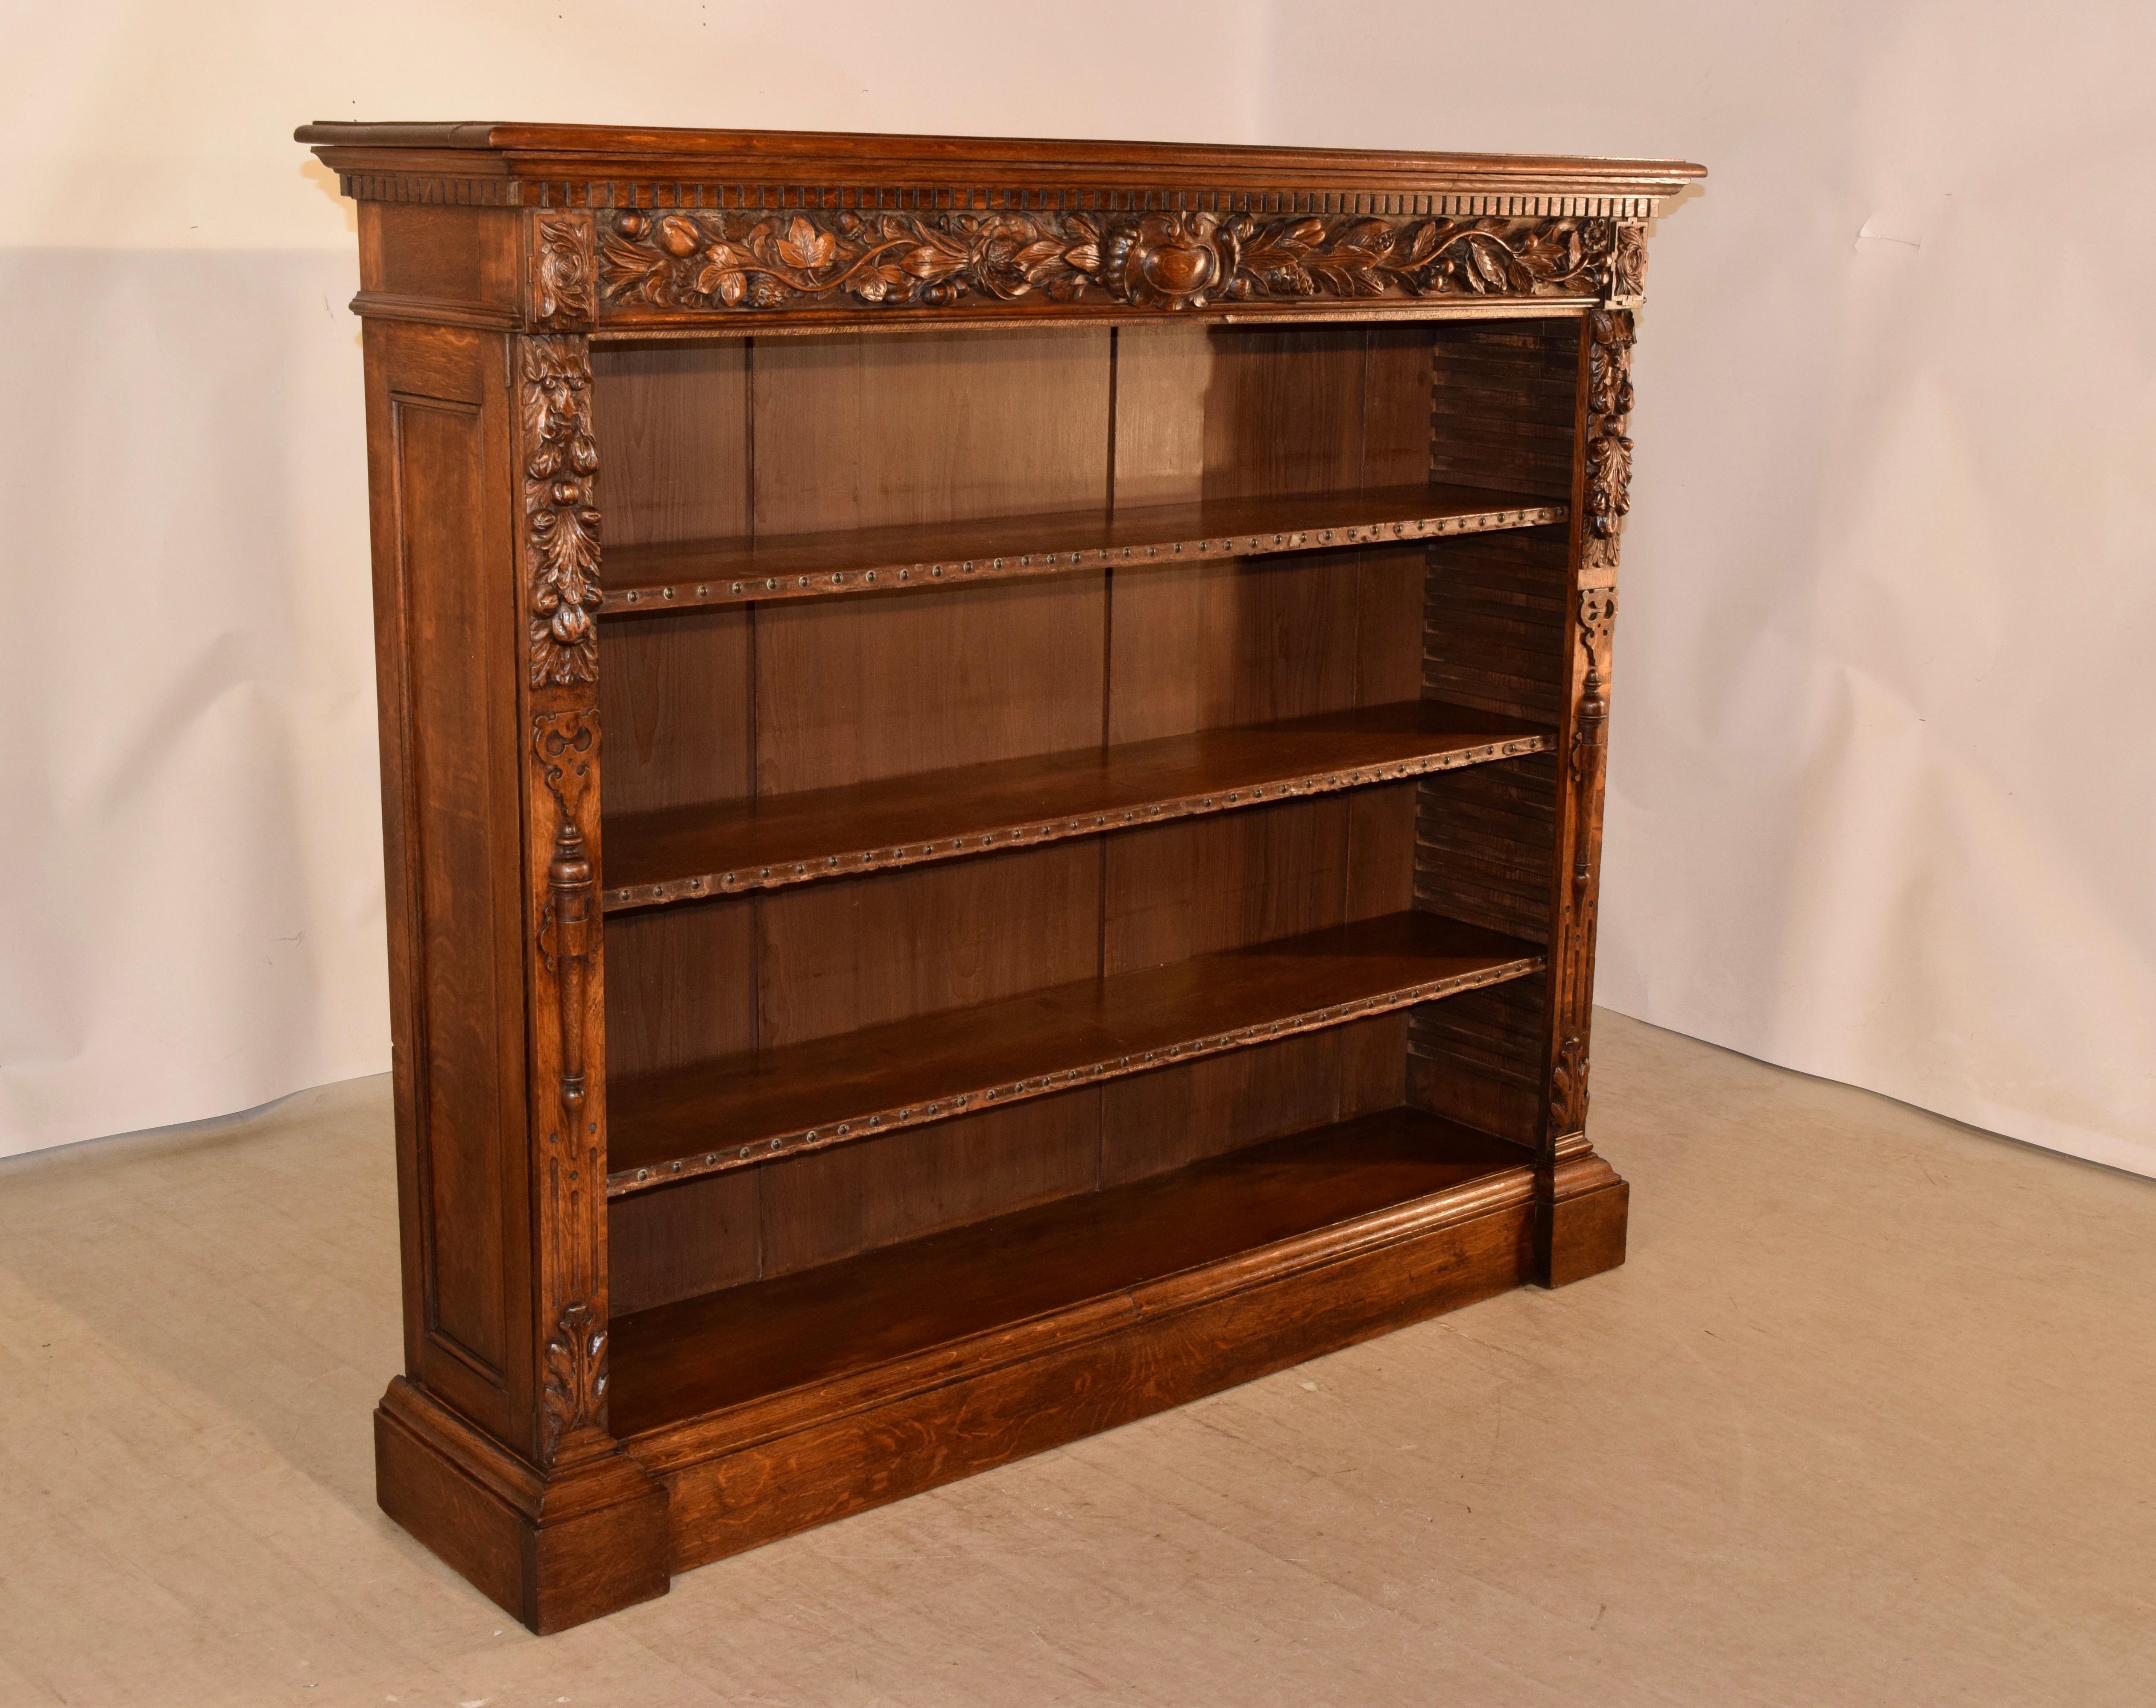 19th century wonderfully hand carved oak bookcase from France. The top has a beveled edge, following down to a highly detailed hand carved apron depicting a central cartouche flanked by floral and leaf decoration, and hand carved decorated columns